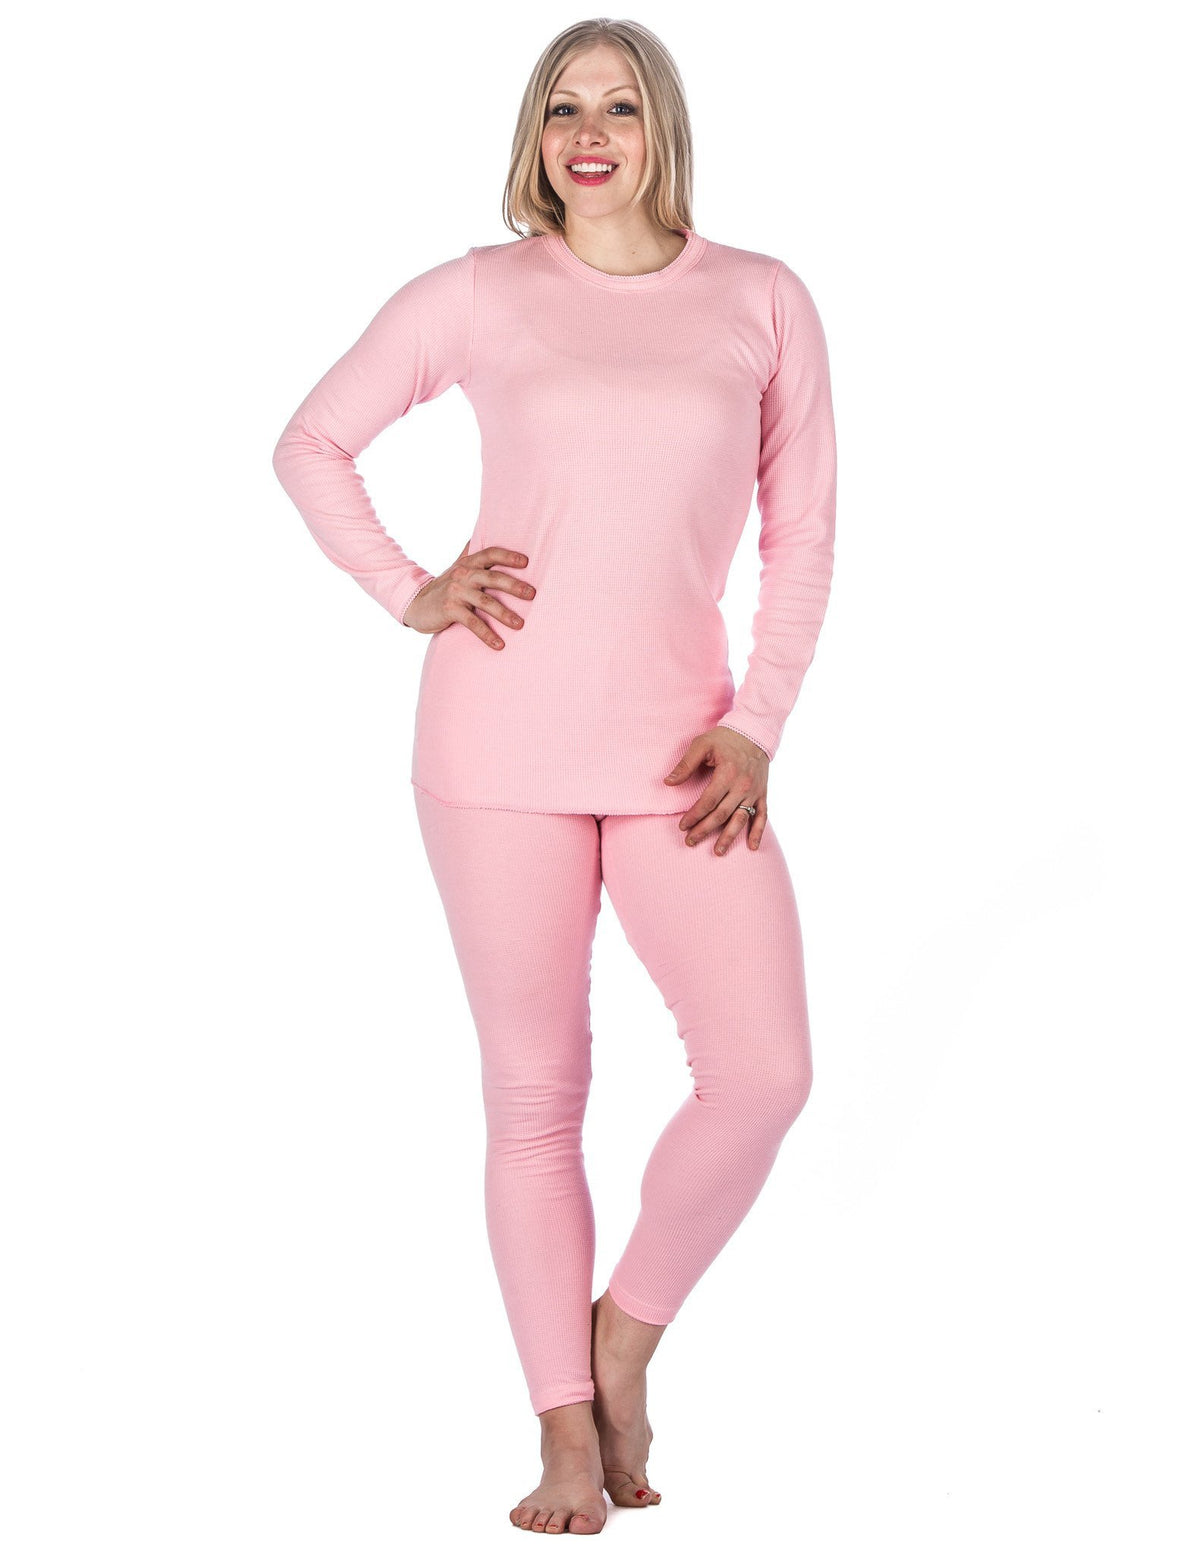 Women's Classic Waffle Knit Thermal Top and Bottom Set - Pink